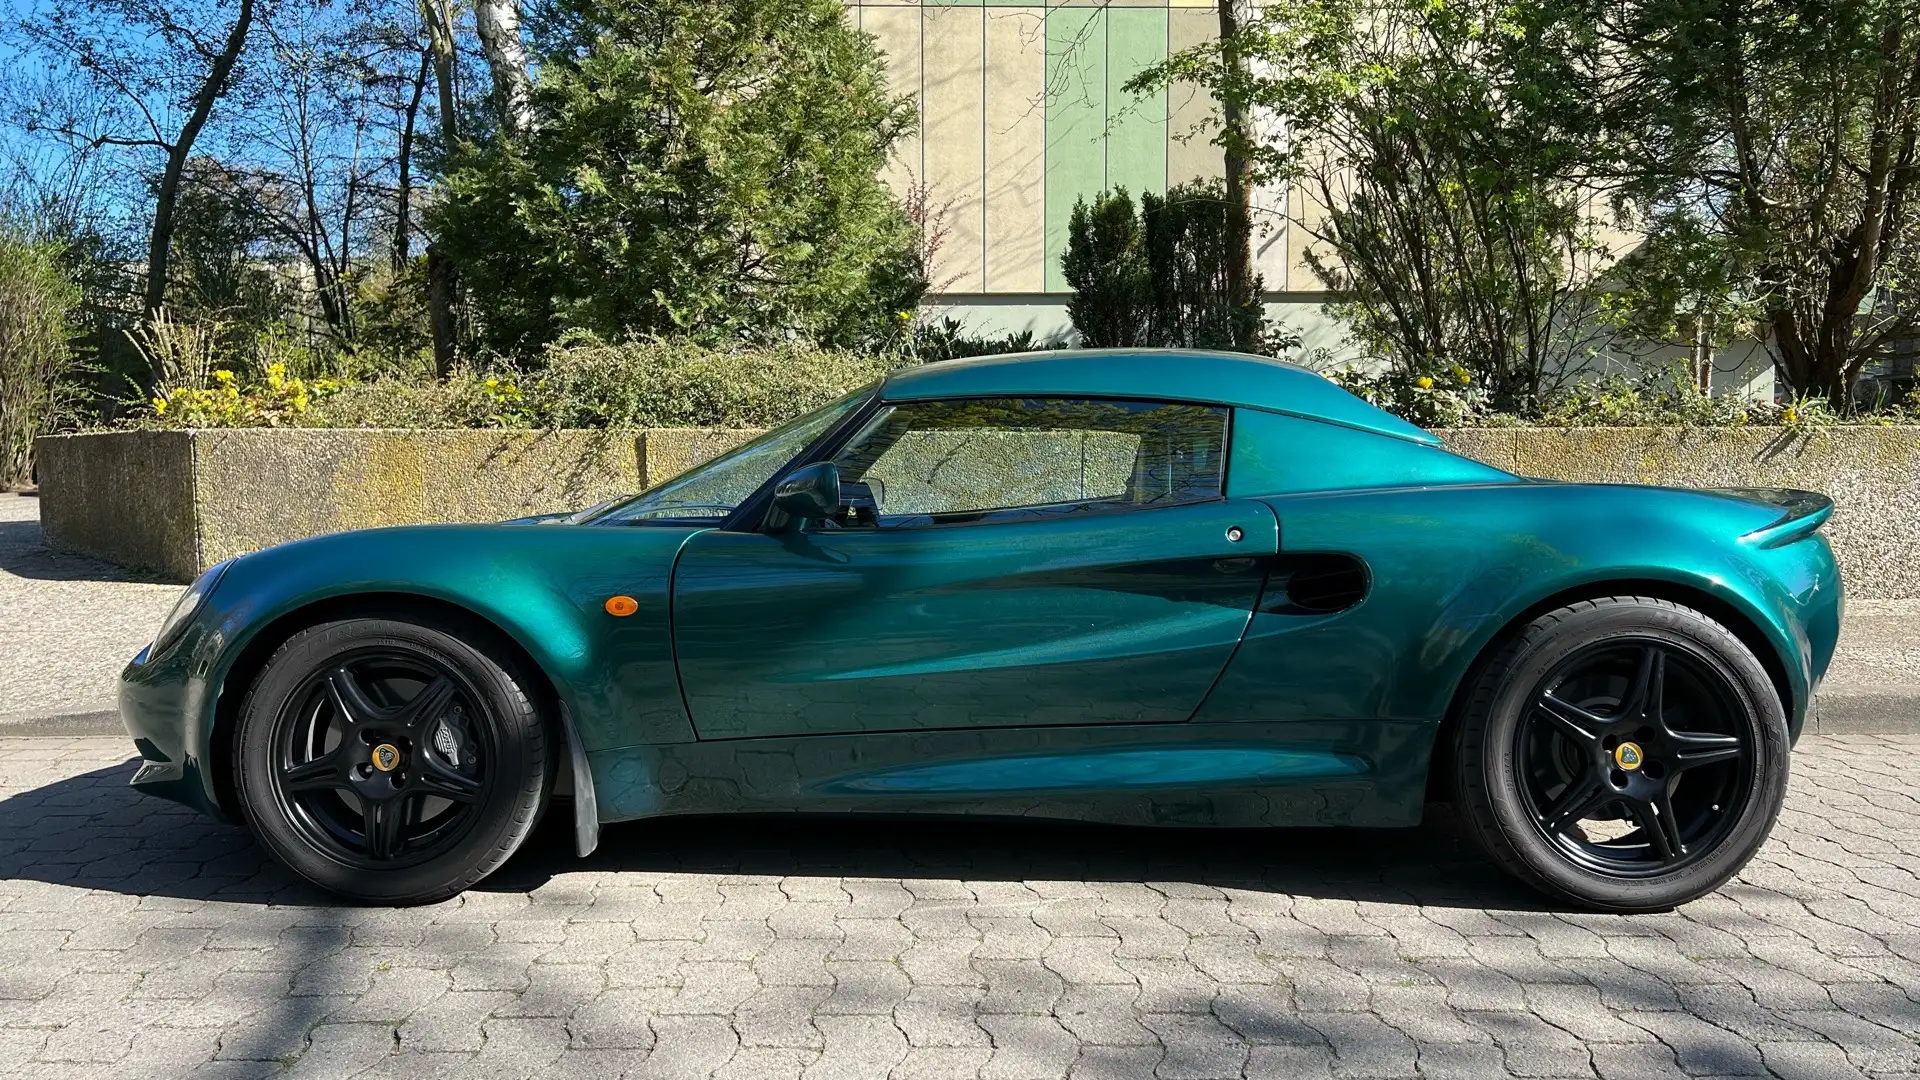 Lotus Elise LHD, Rotec, sehr guter Zustand Groen - 1